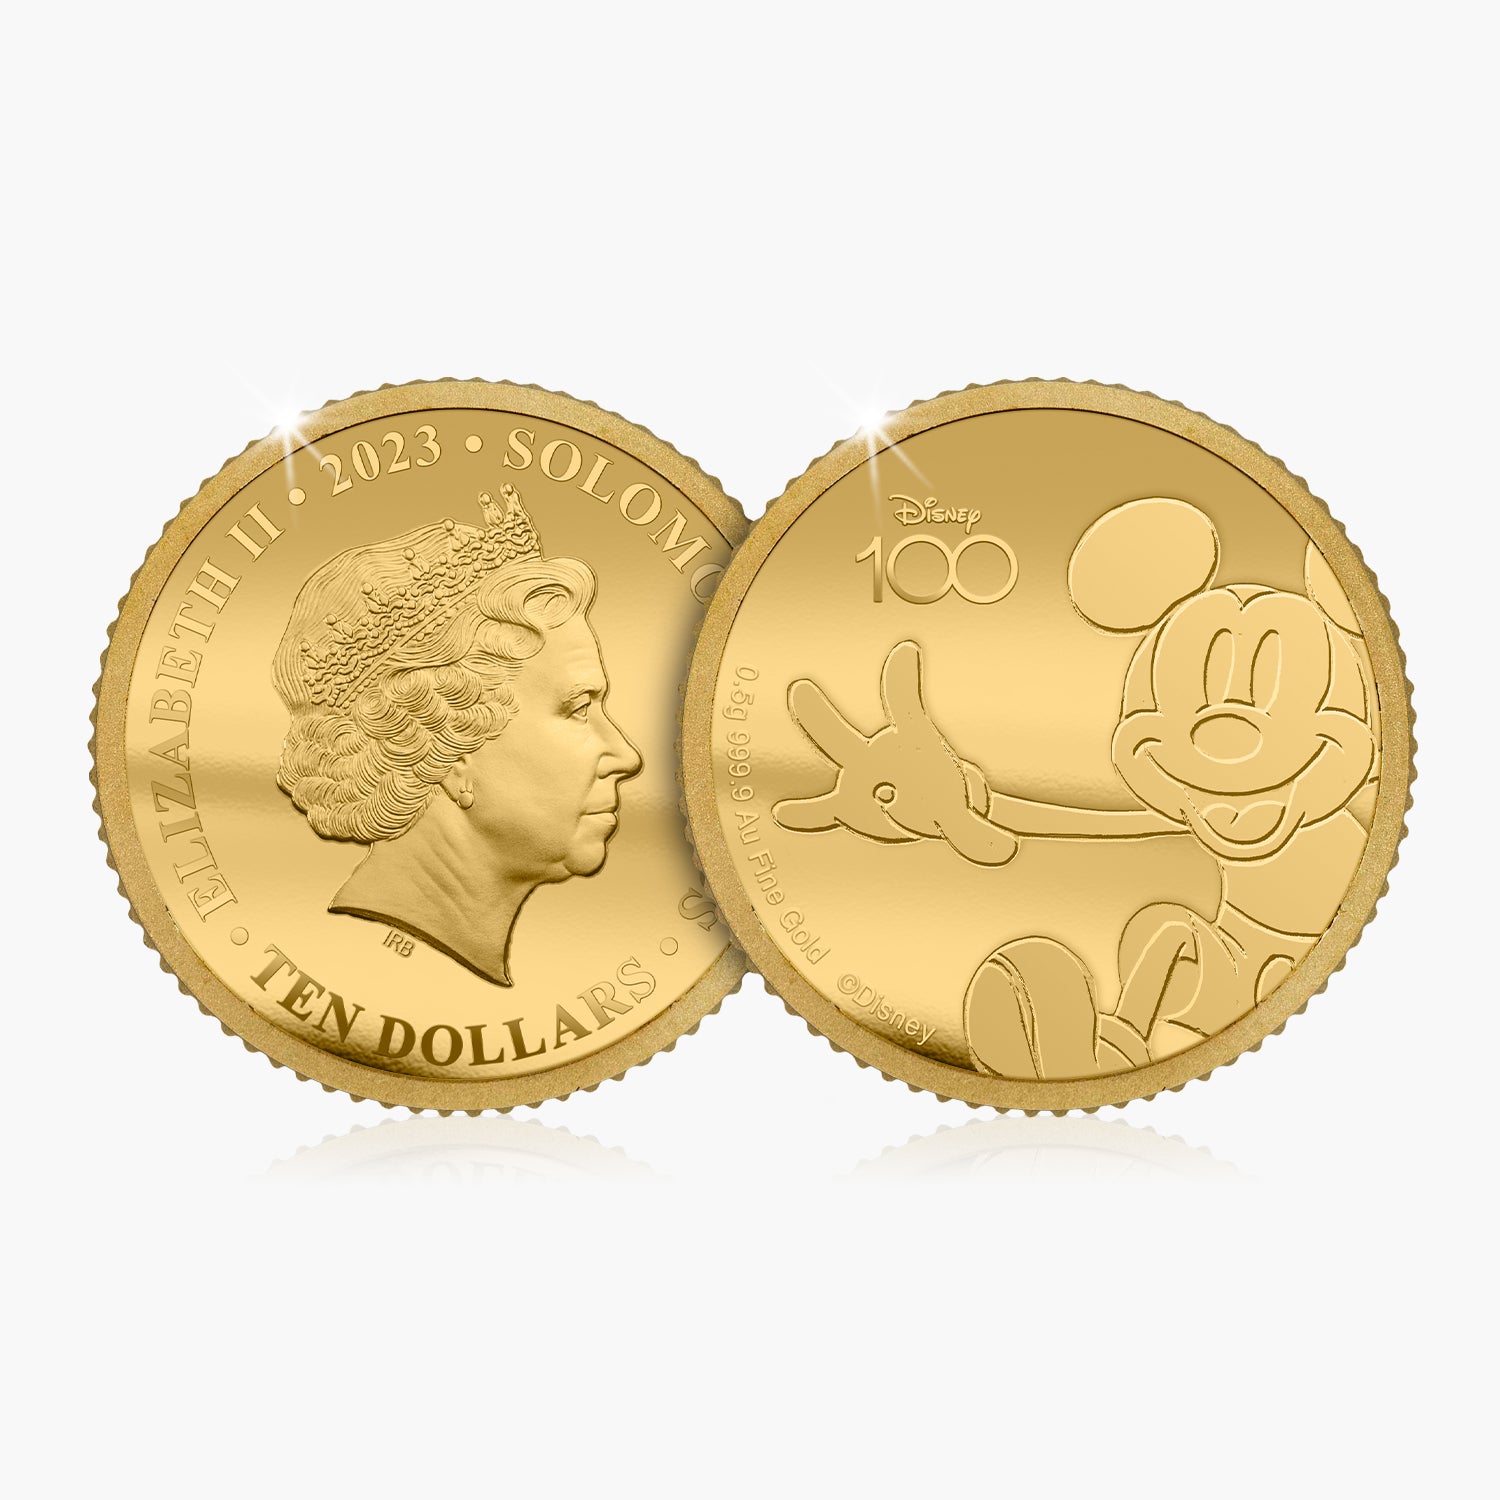 Disney 100th Anniversary Mickey Mouse Solid Gold Coin